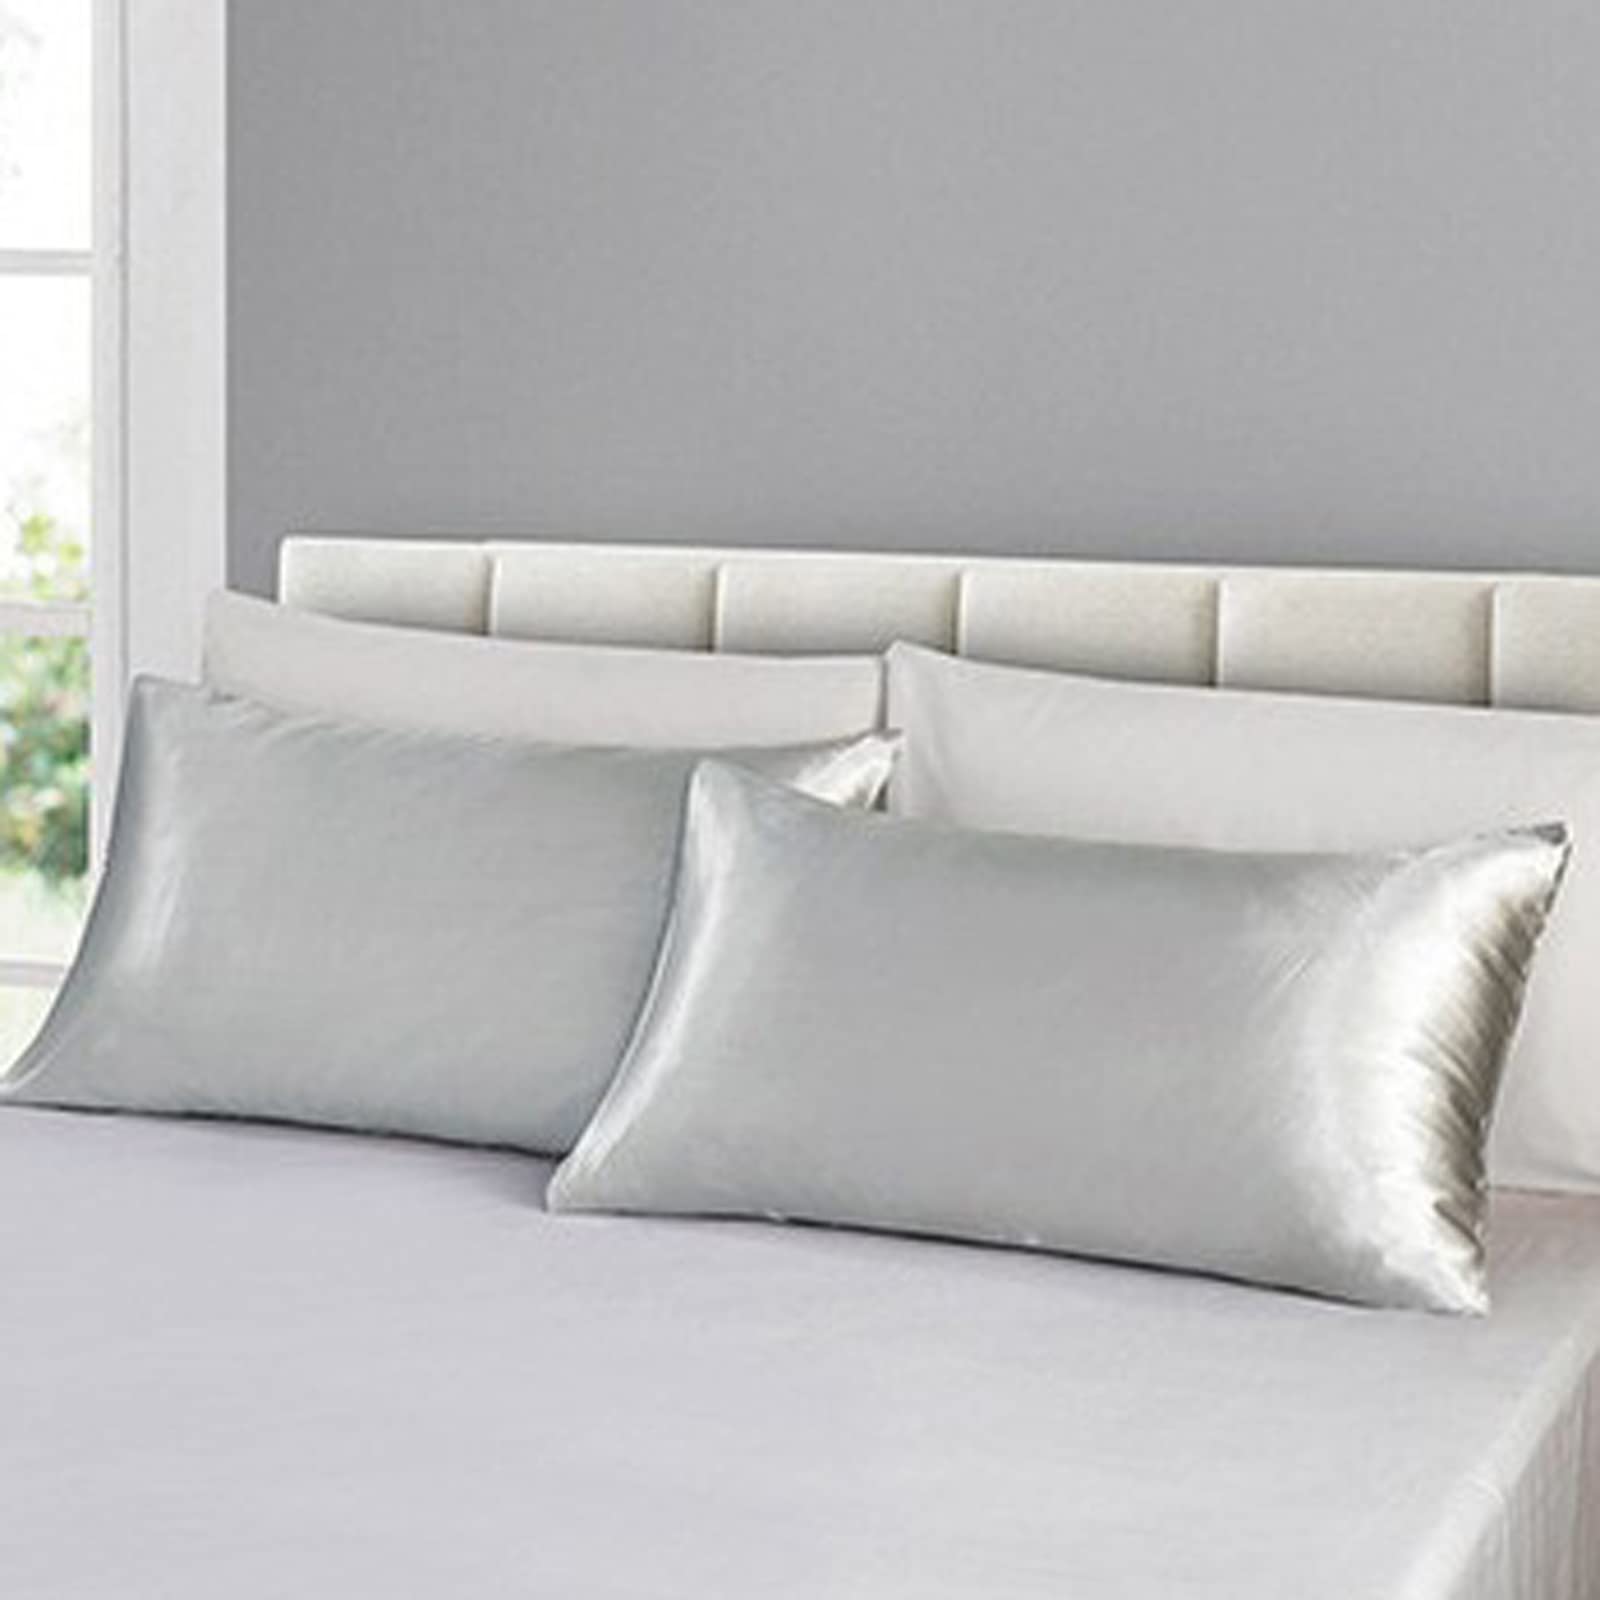 One-Pair Satin Pillow Cases - Fourteen Colours Available